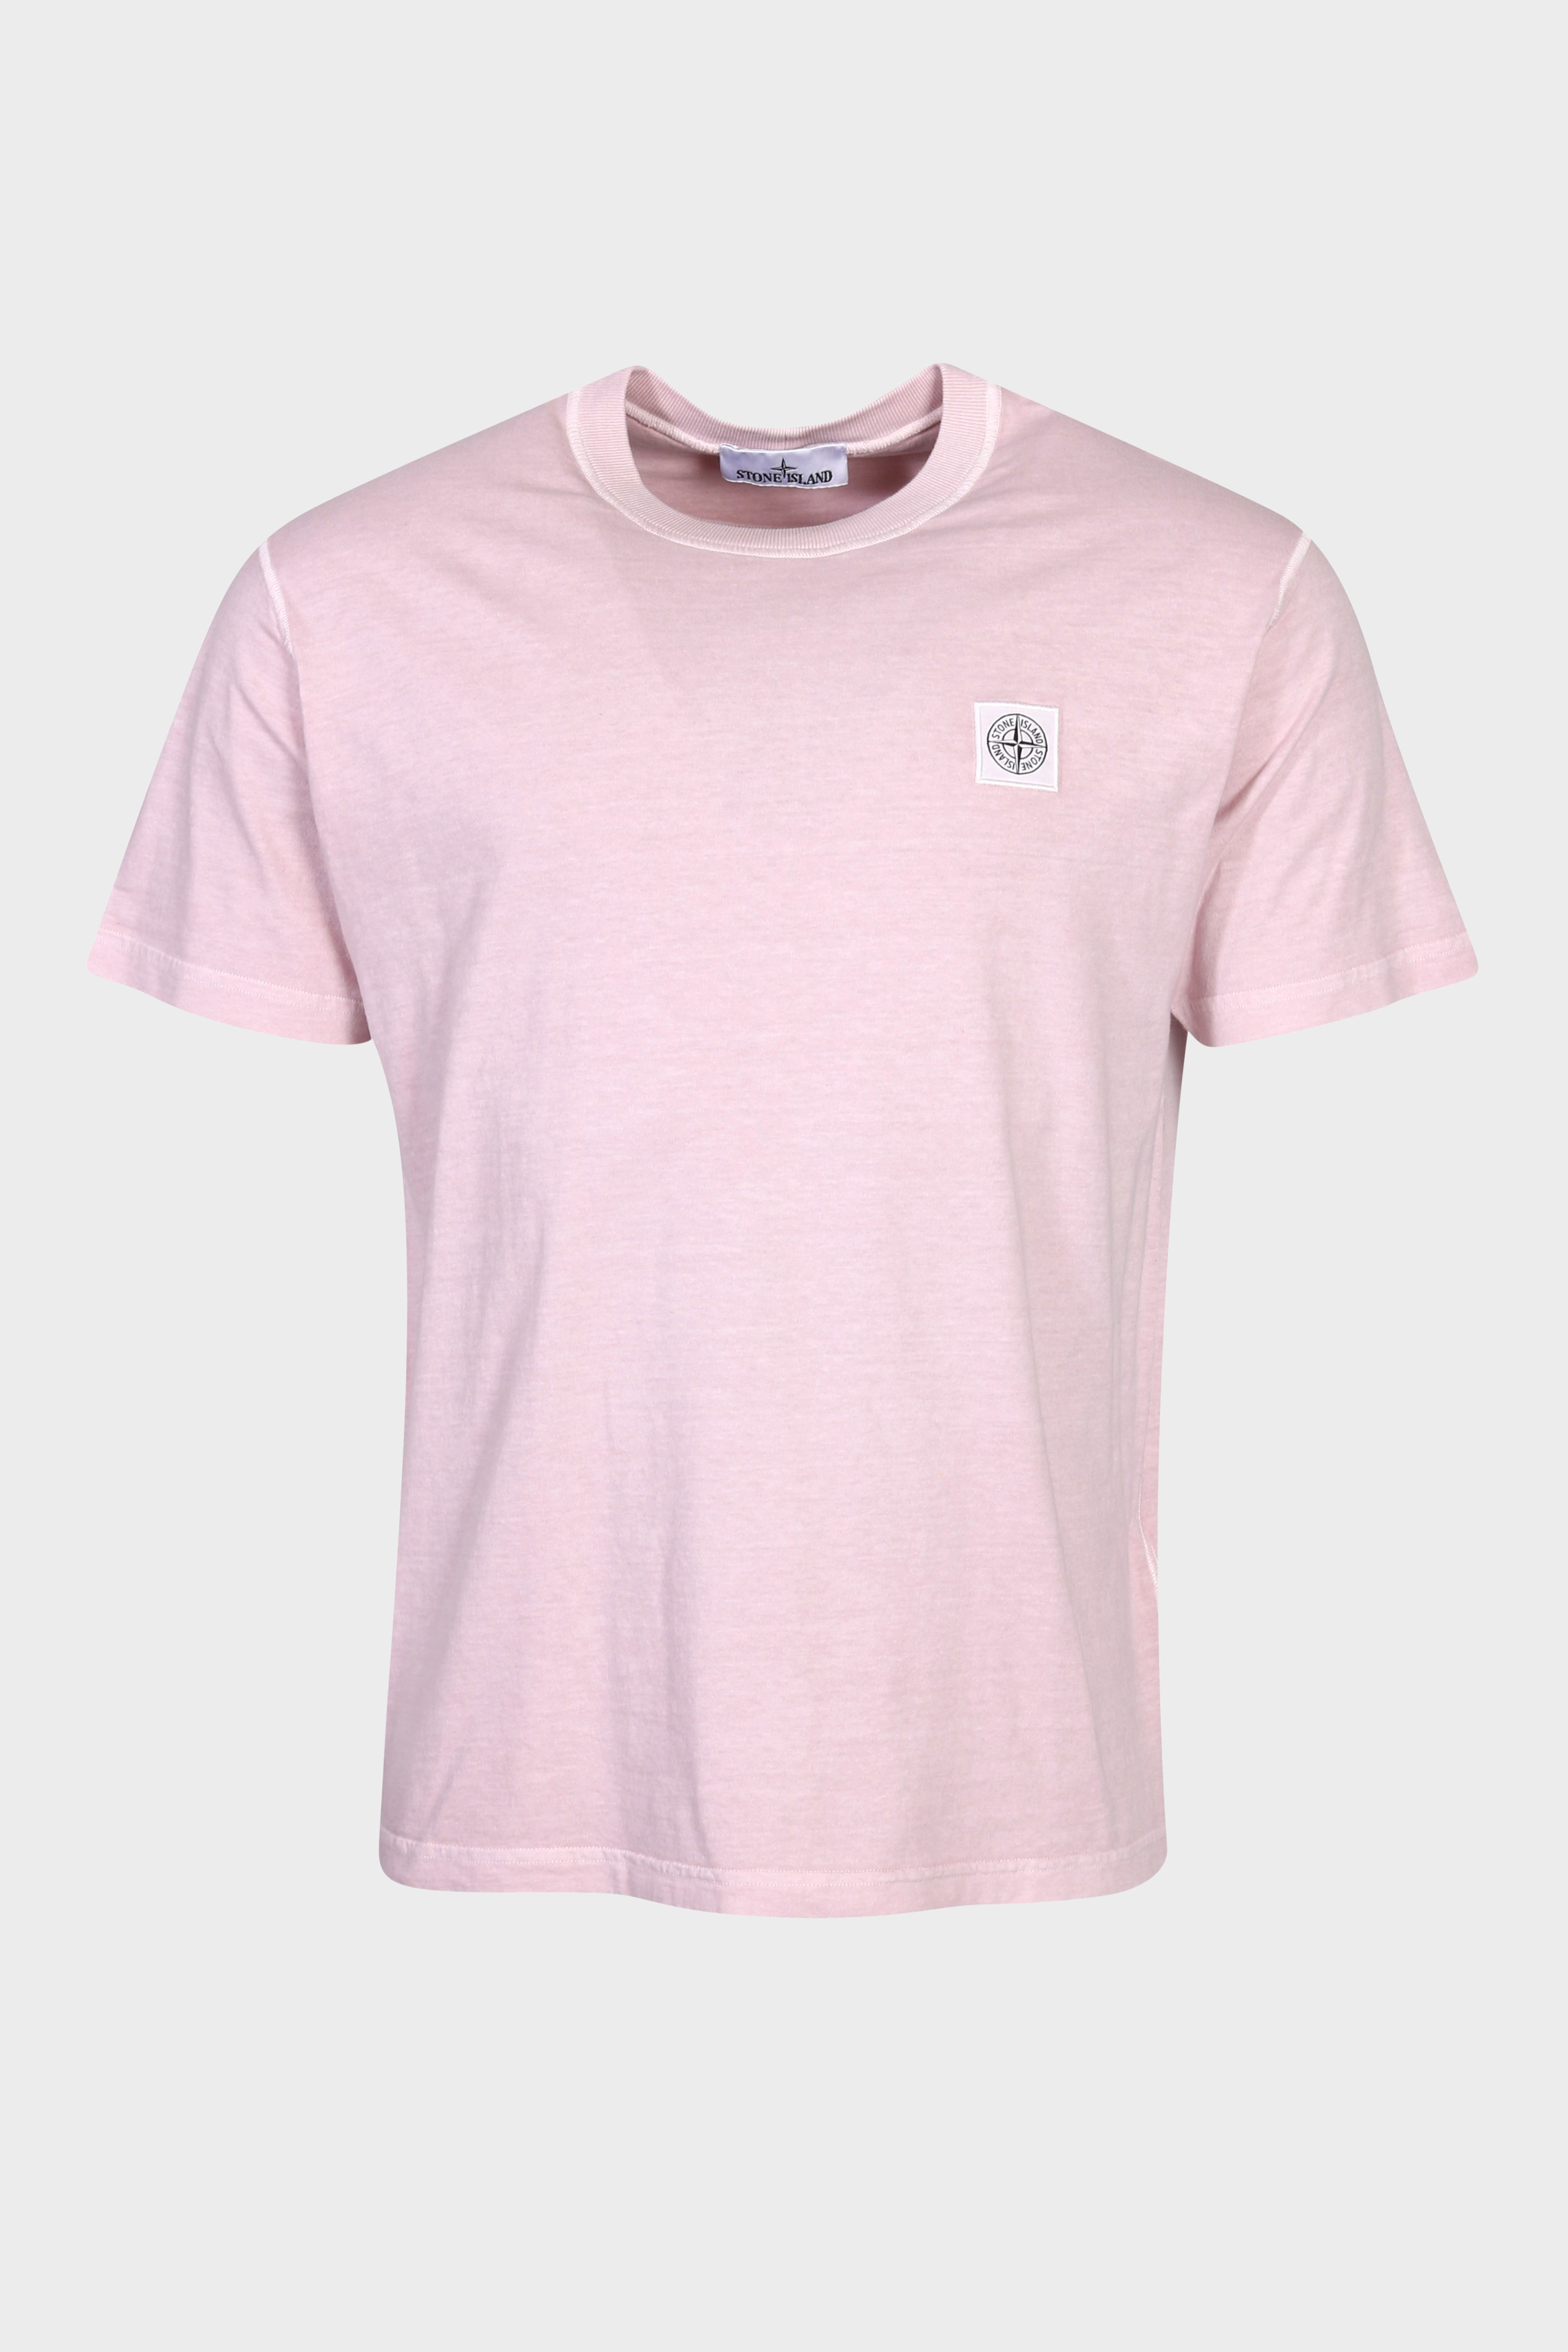 STONE ISLAND T-Shirt in Washed Light Pink 3XL